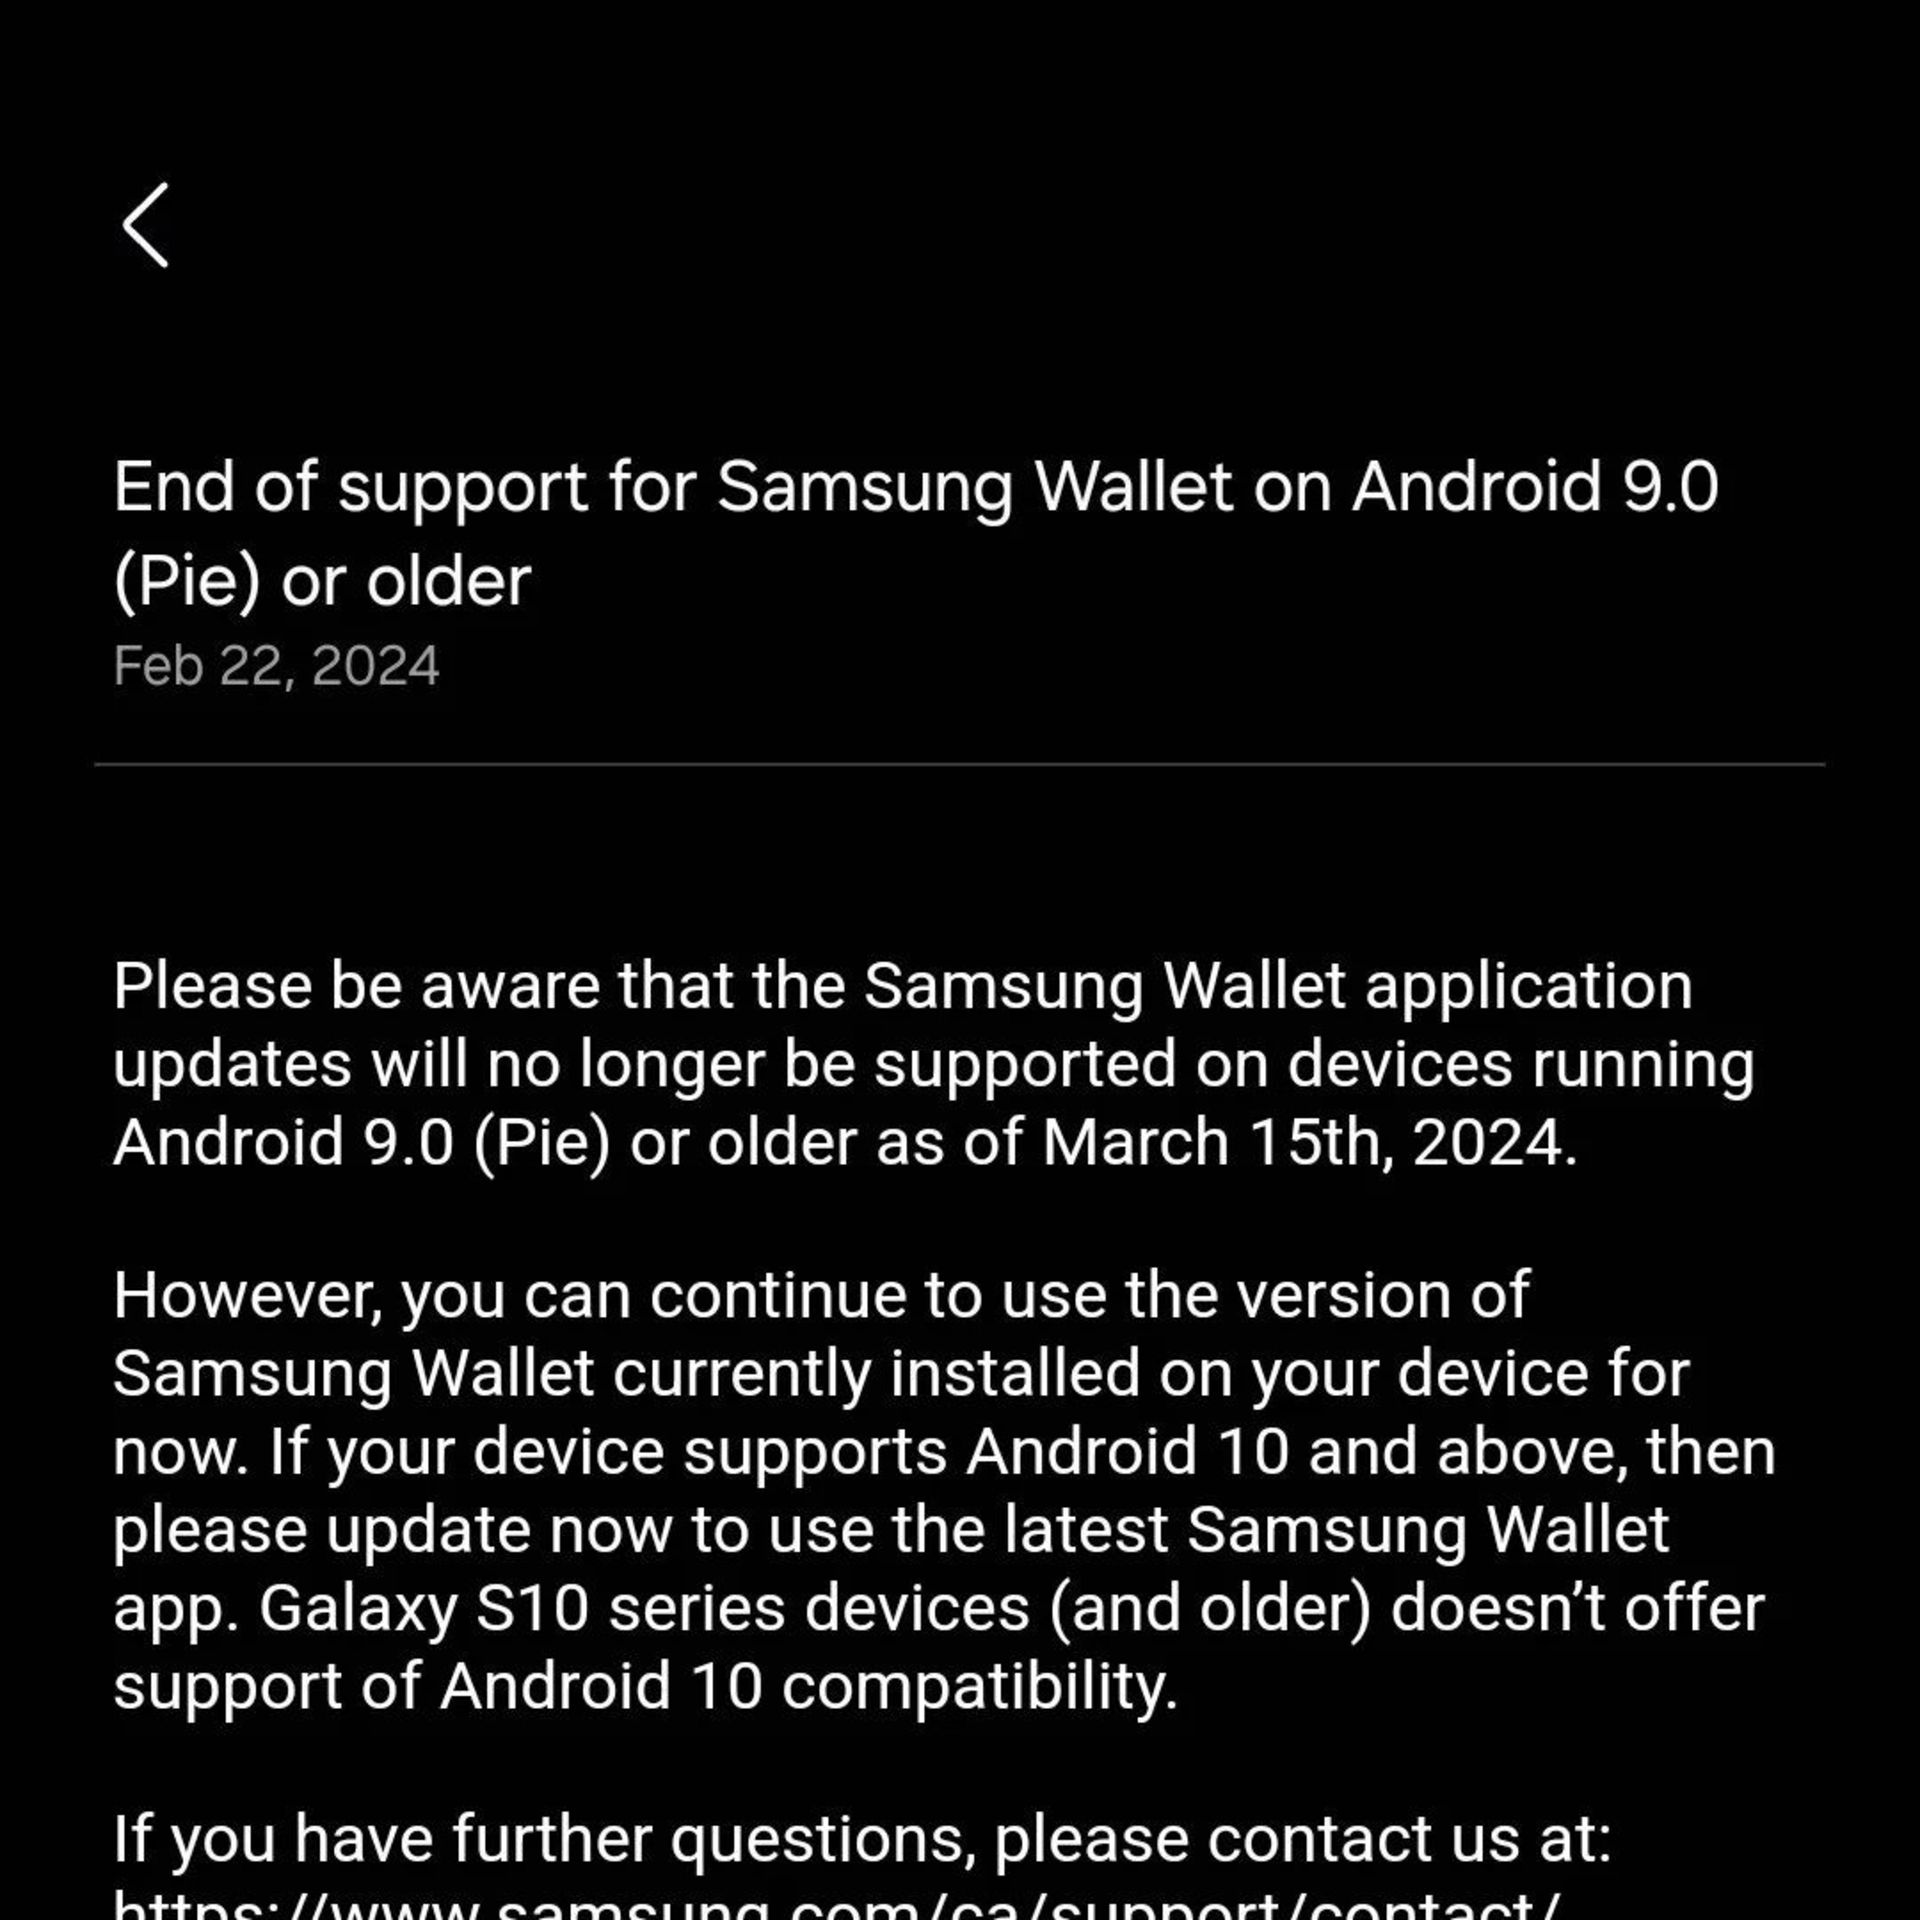 End of support warning for Samsung Volt app on old Galaxy phones